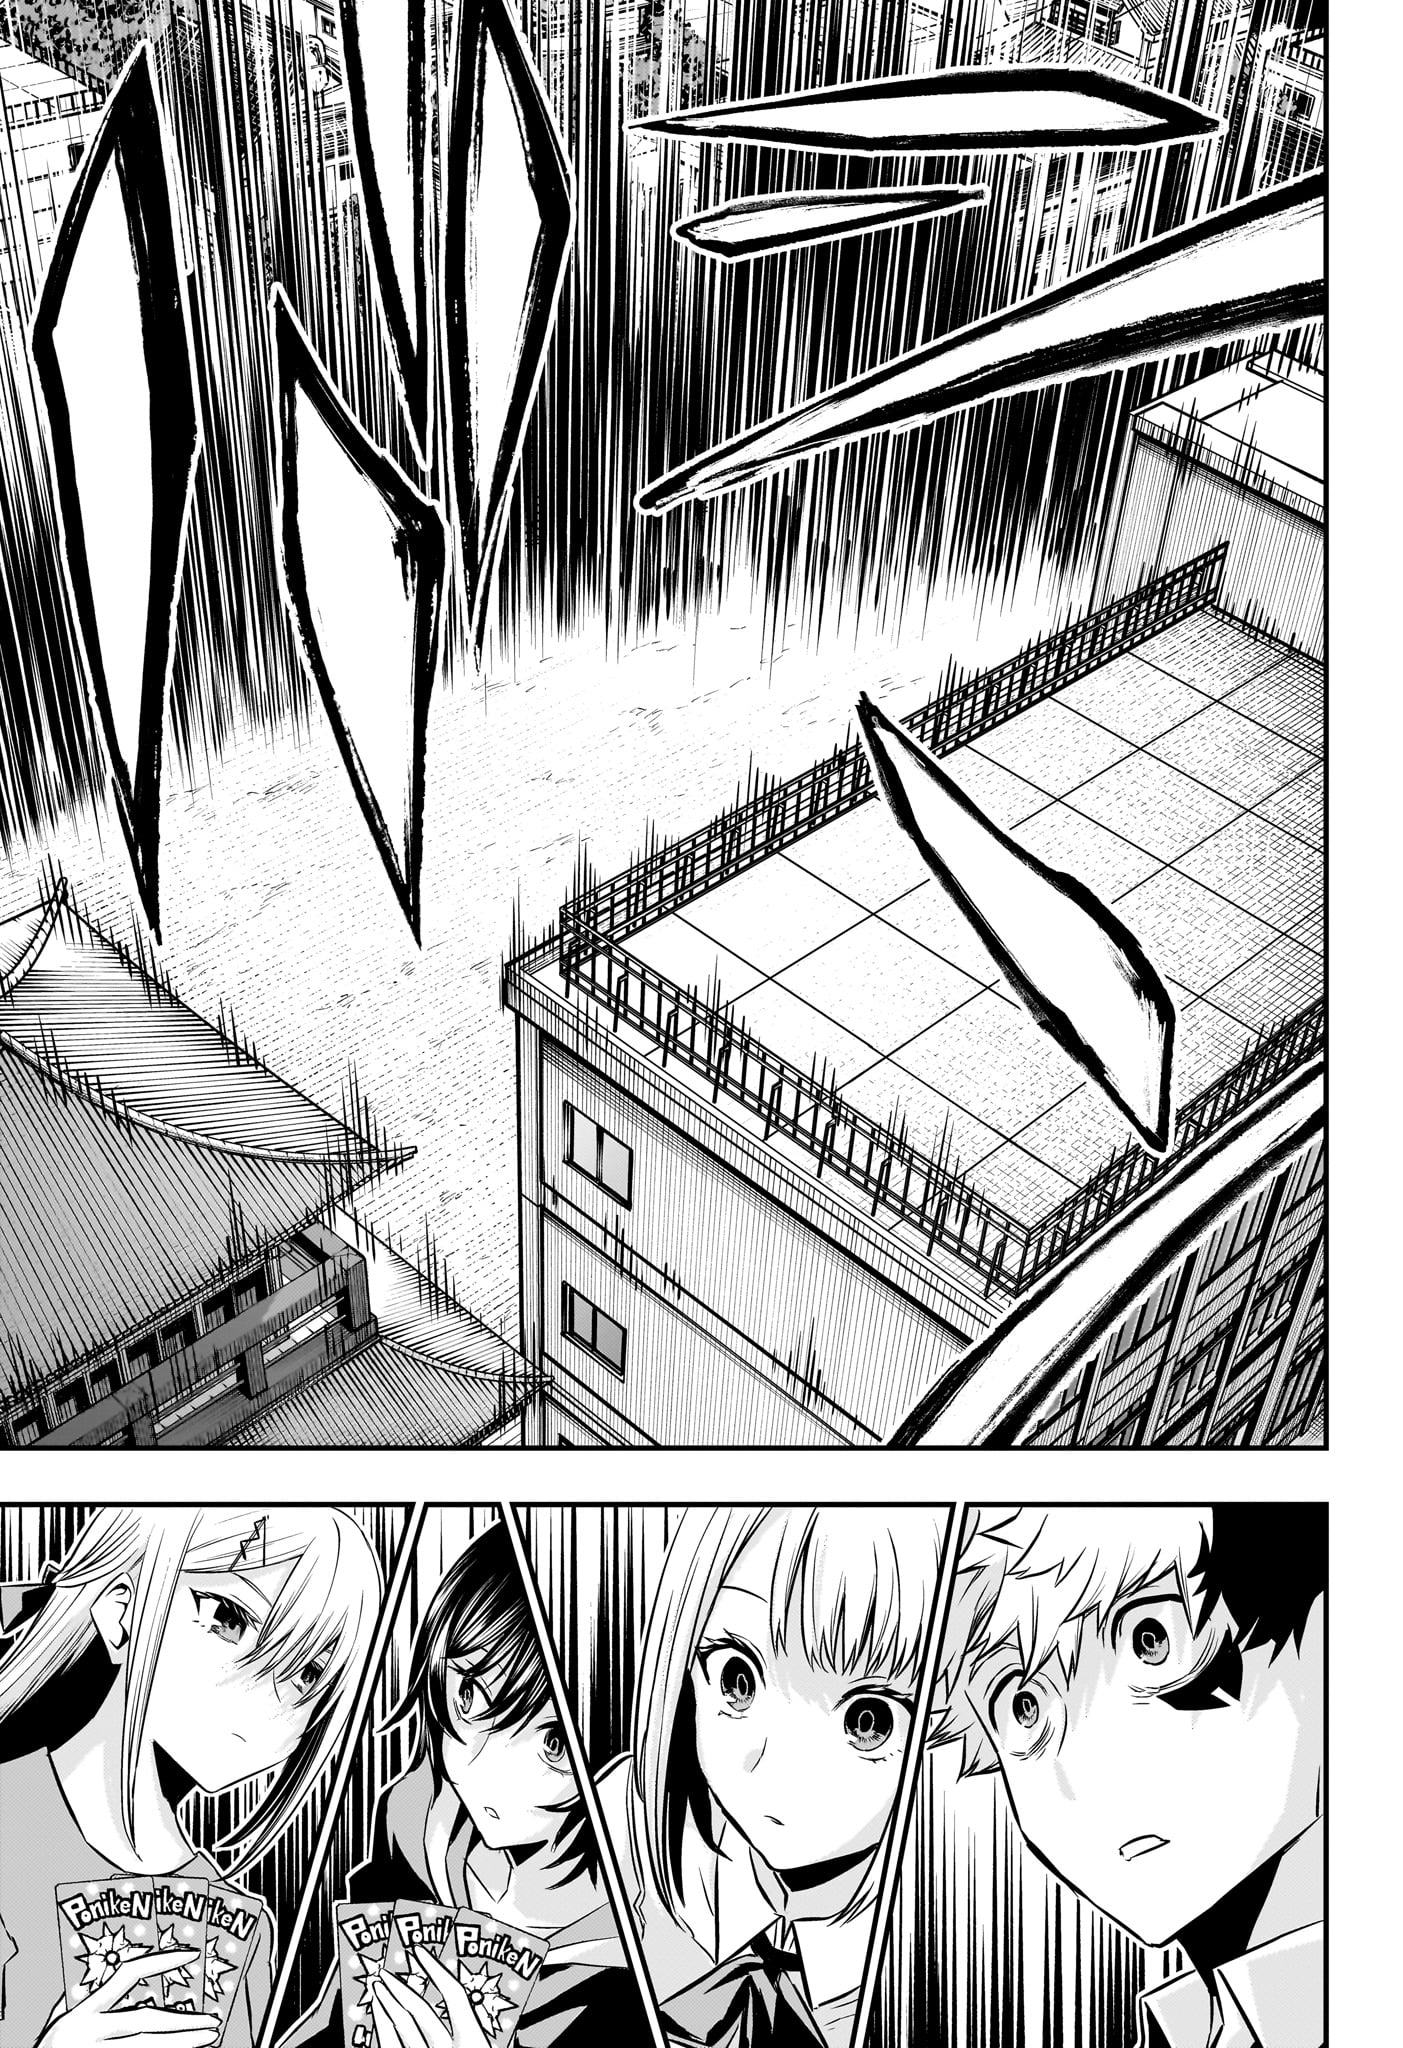 Nue no Onmyouji - Chapter 50 - Page 9